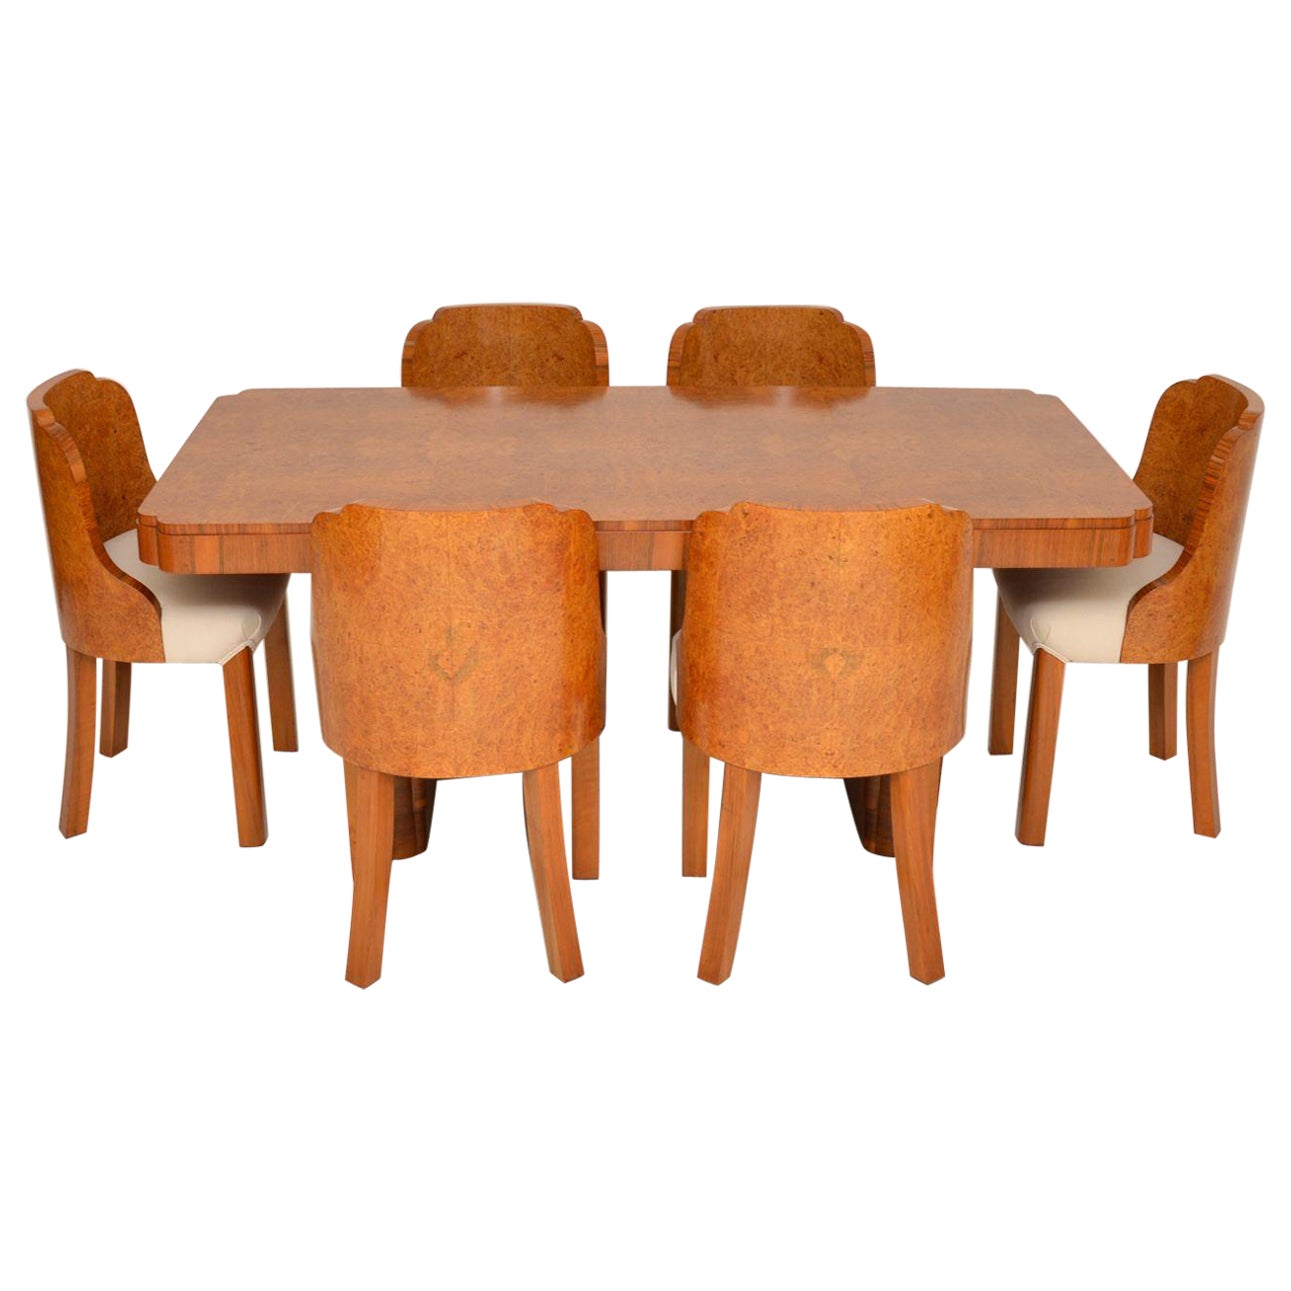 1930s Art Deco Burr Walnut Cloud Back Dining Table & Chairs For Sale